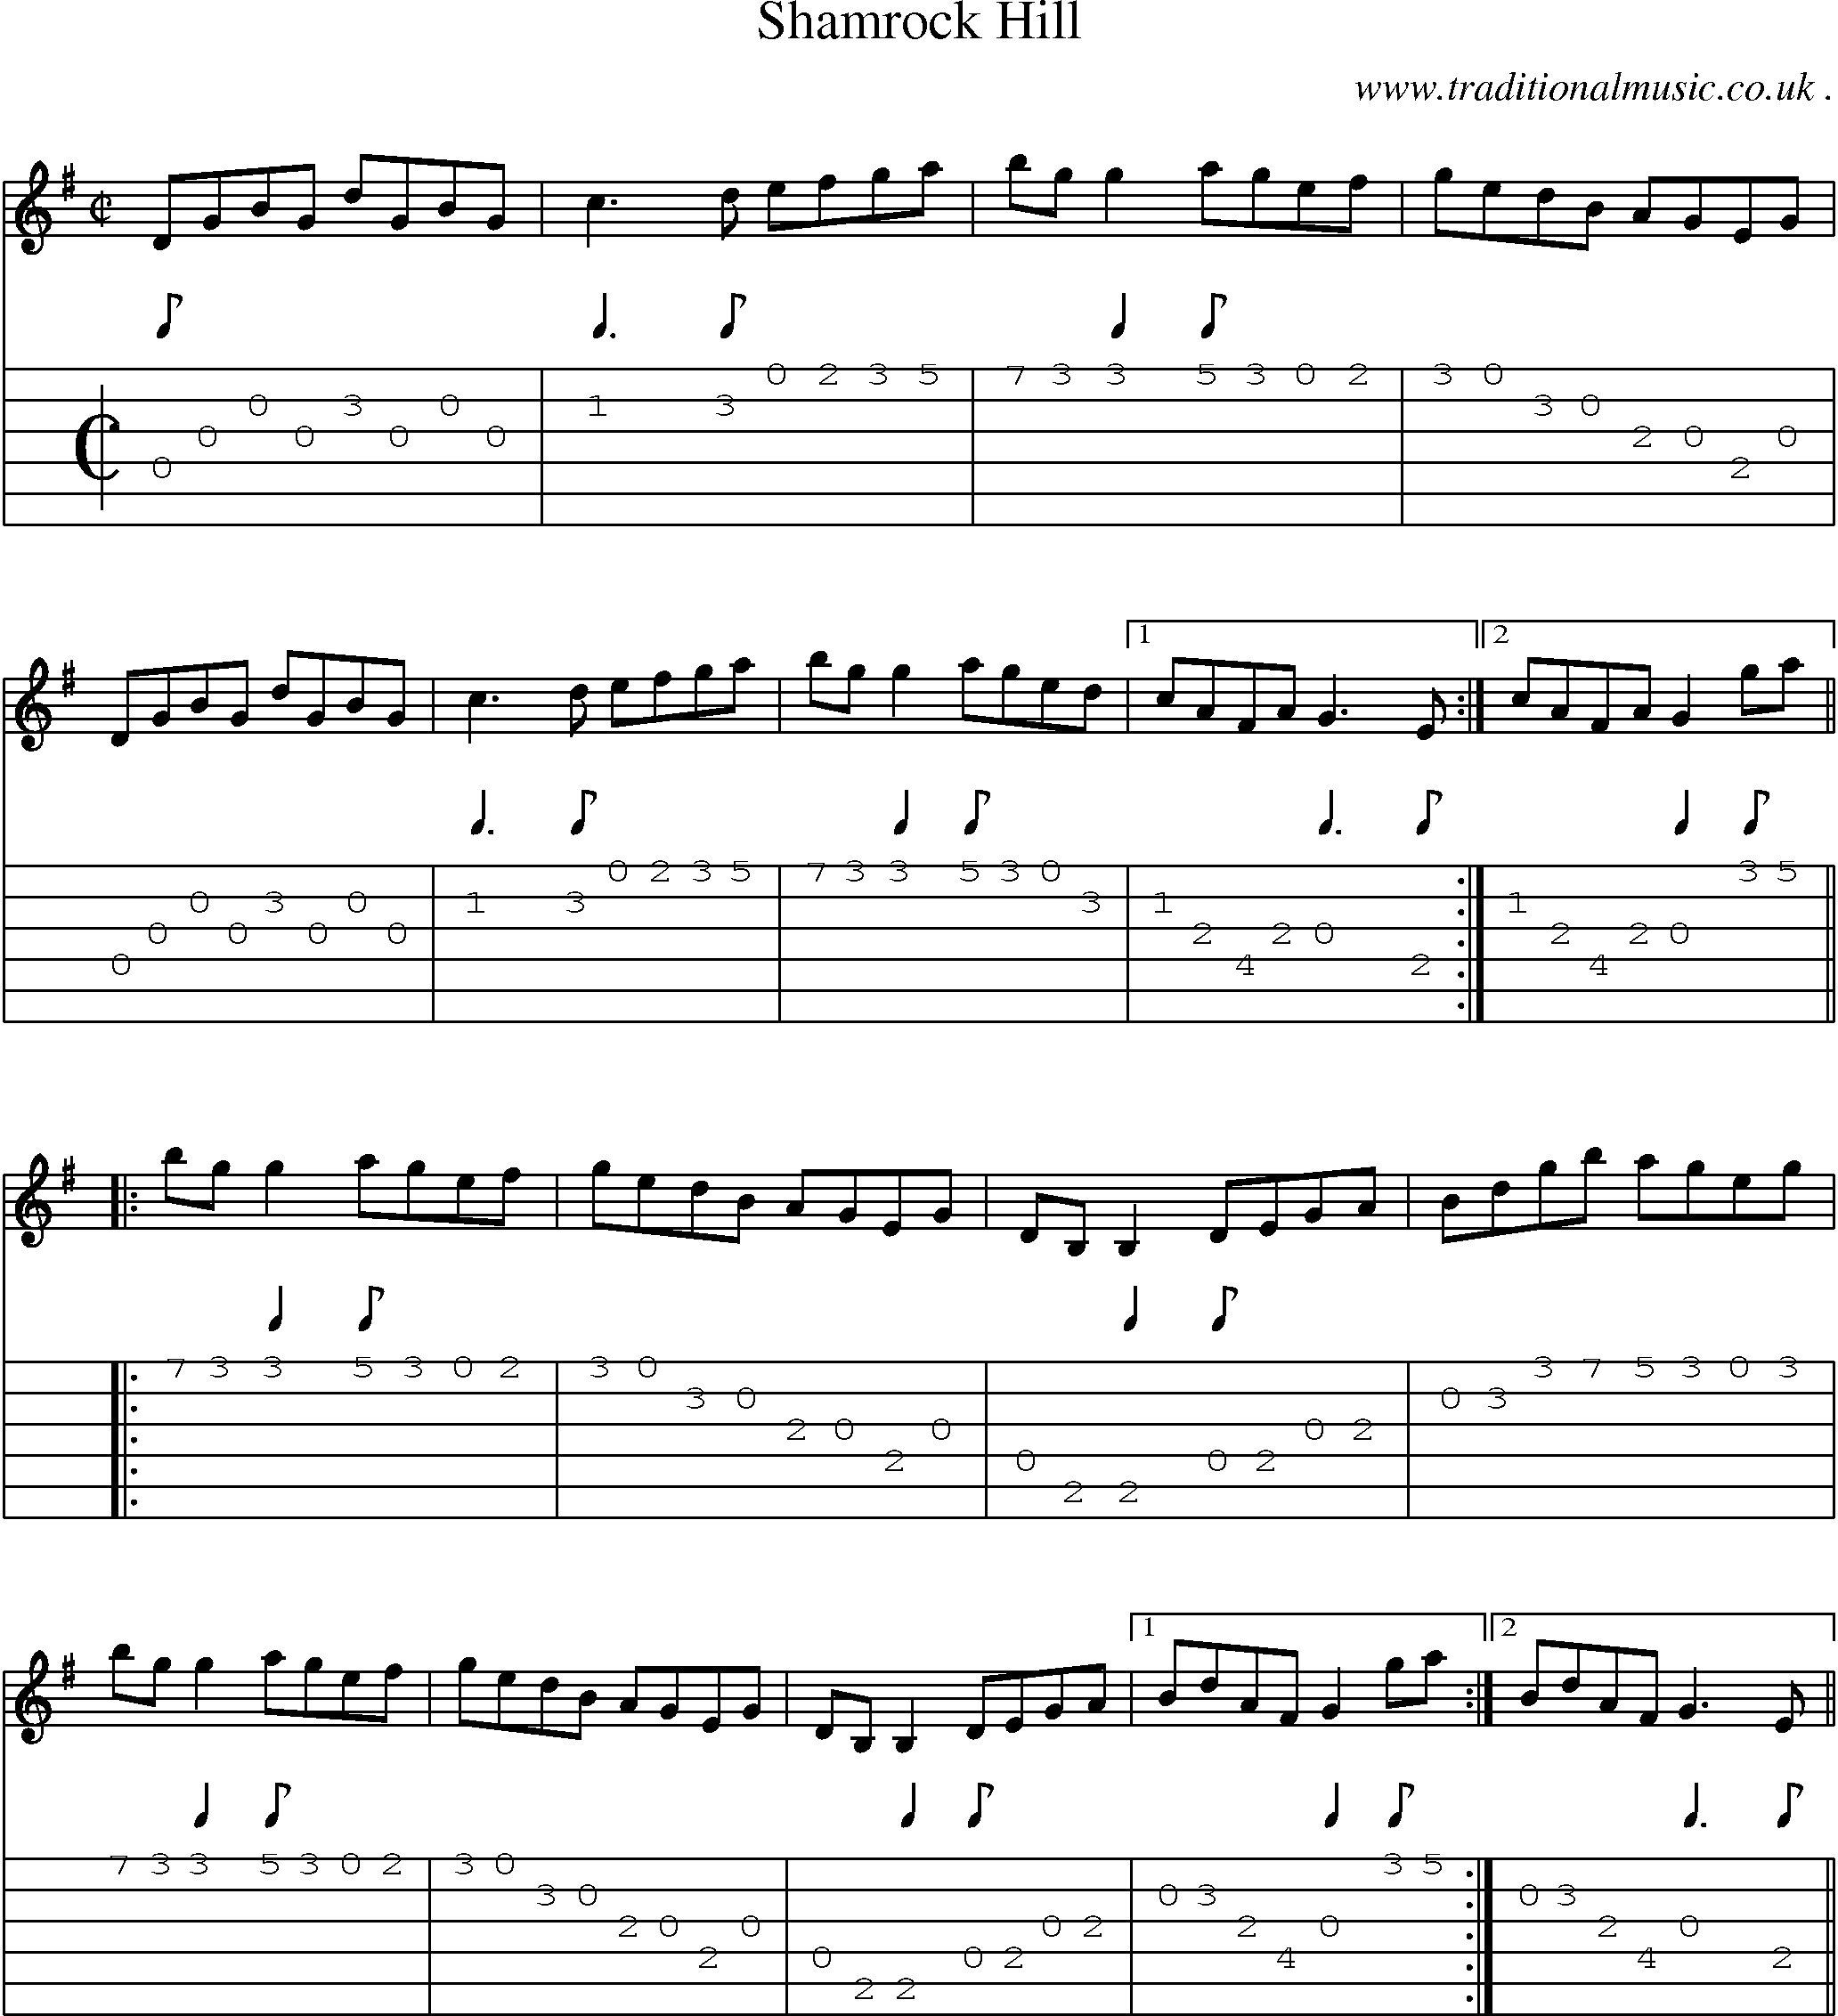 Sheet-Music and Guitar Tabs for Shamrock Hill